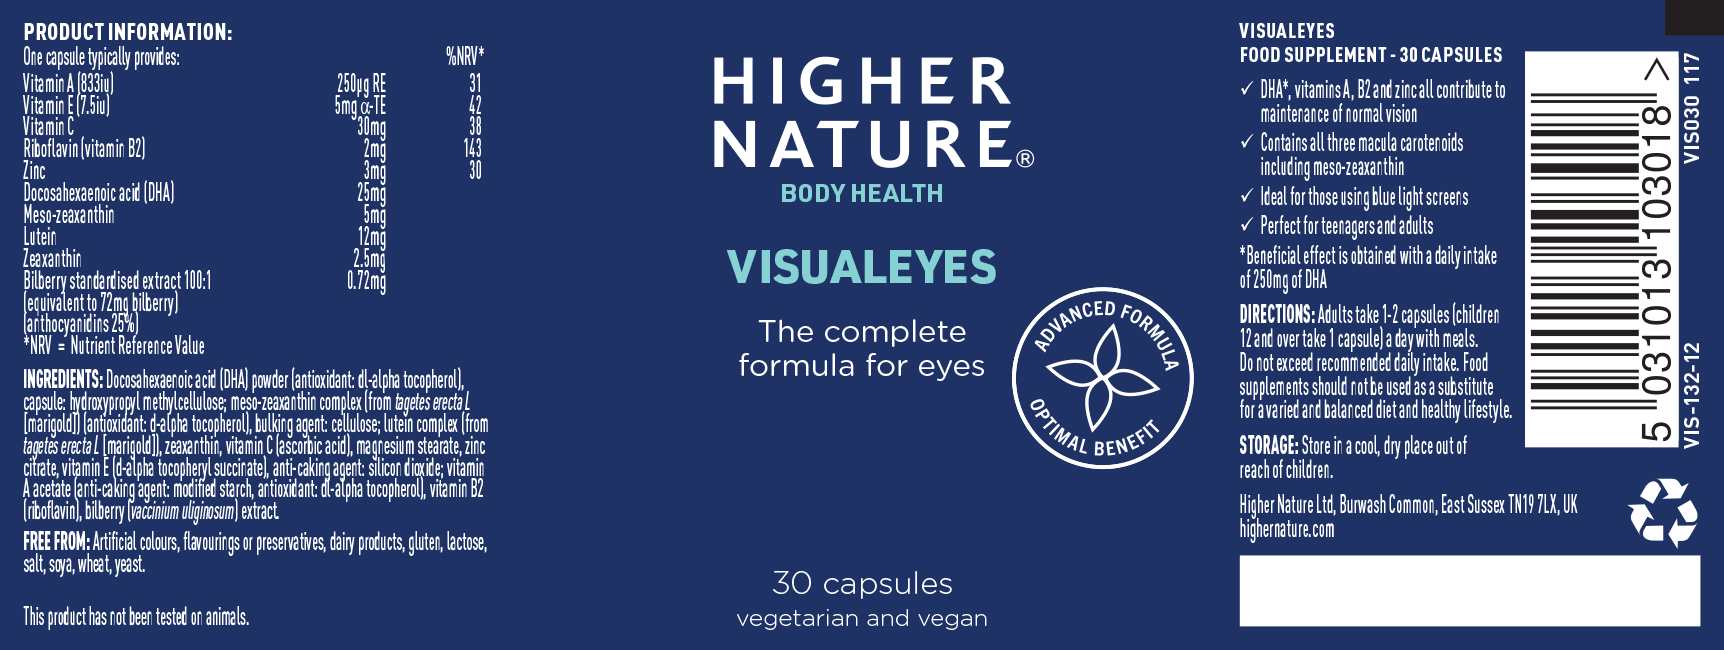 Higher Nature VisualEyes 30's (Currently Unavailable) - Approved Vitamins